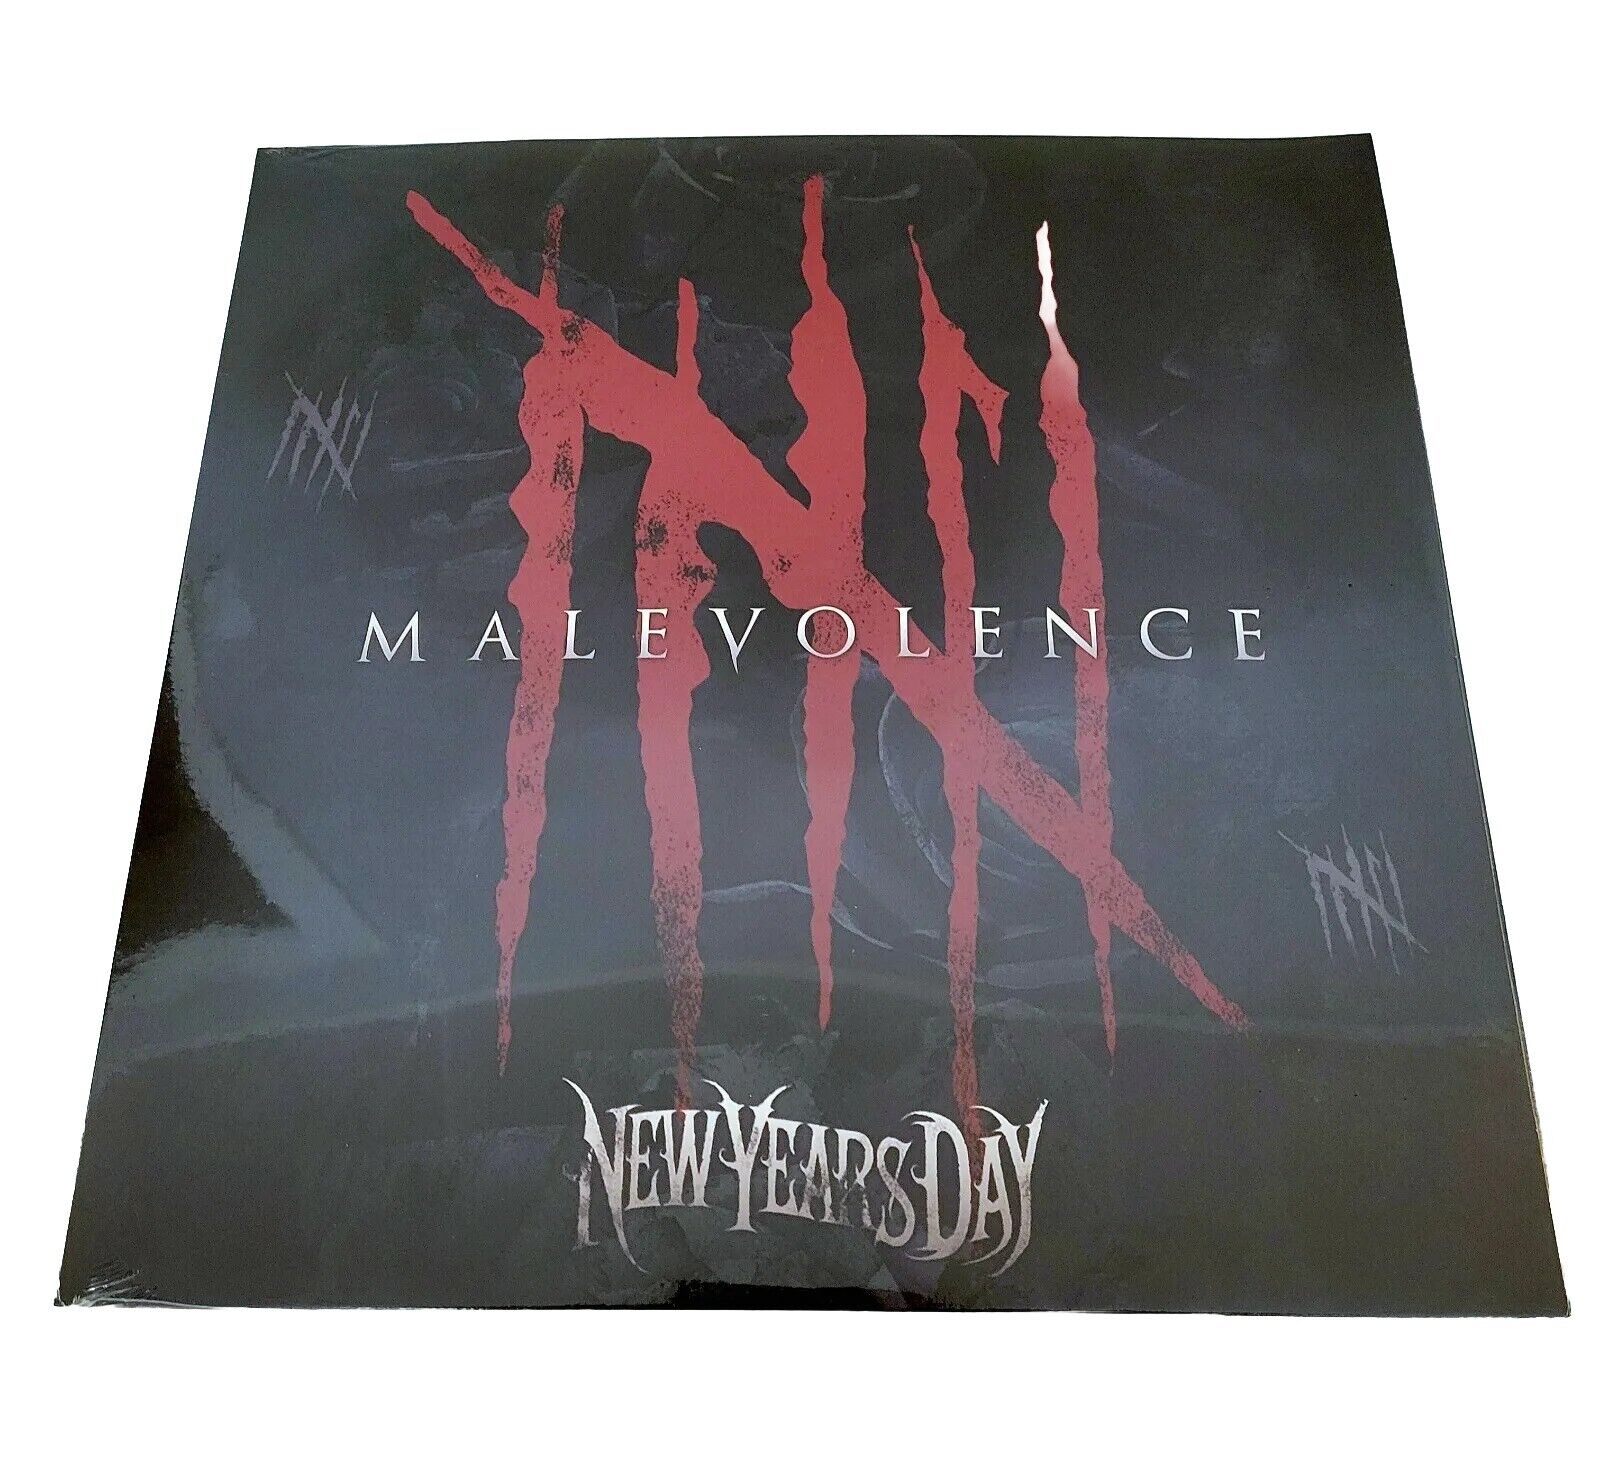 BRAND NEW New Years Day - Malevolence Vinyl LP 2015 Another Record Company